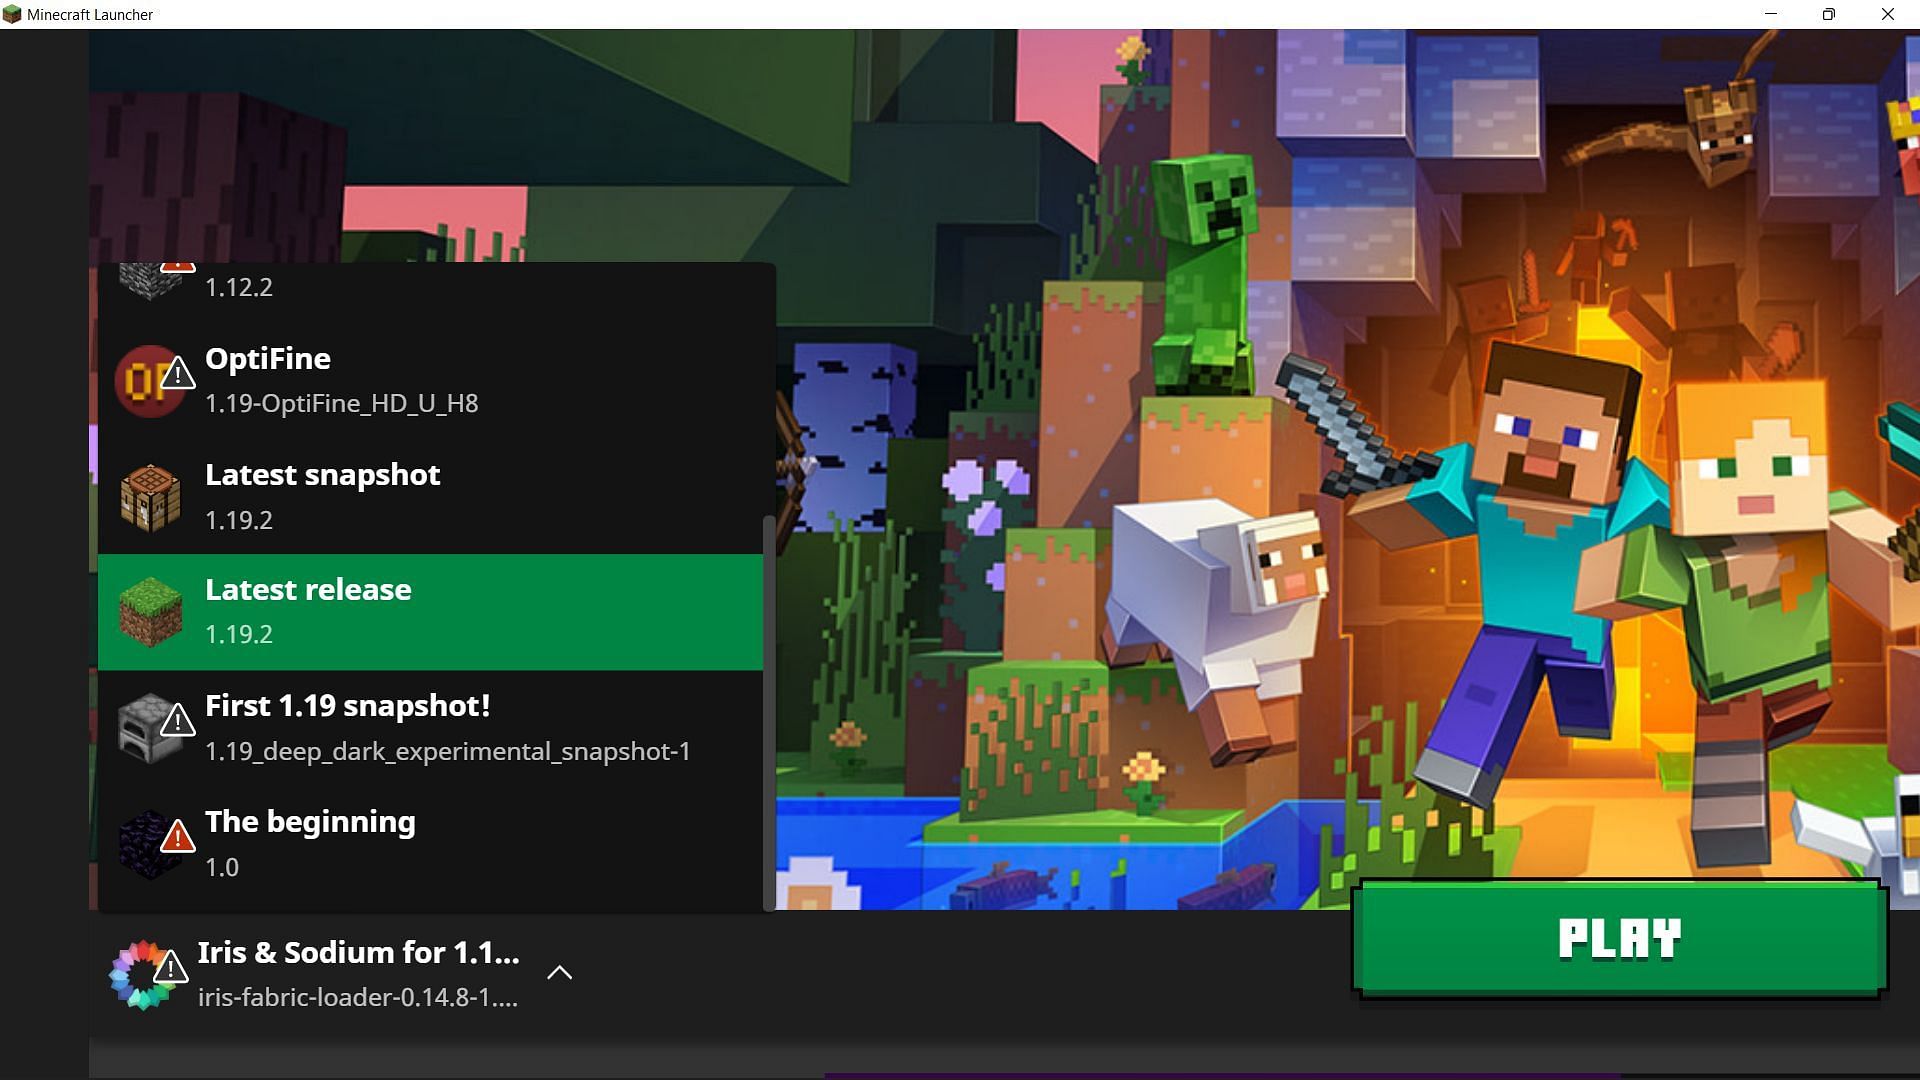 Minecraft 1.19.2 update for Java Edition can be found in the versions list (Image via Sportskeeda)